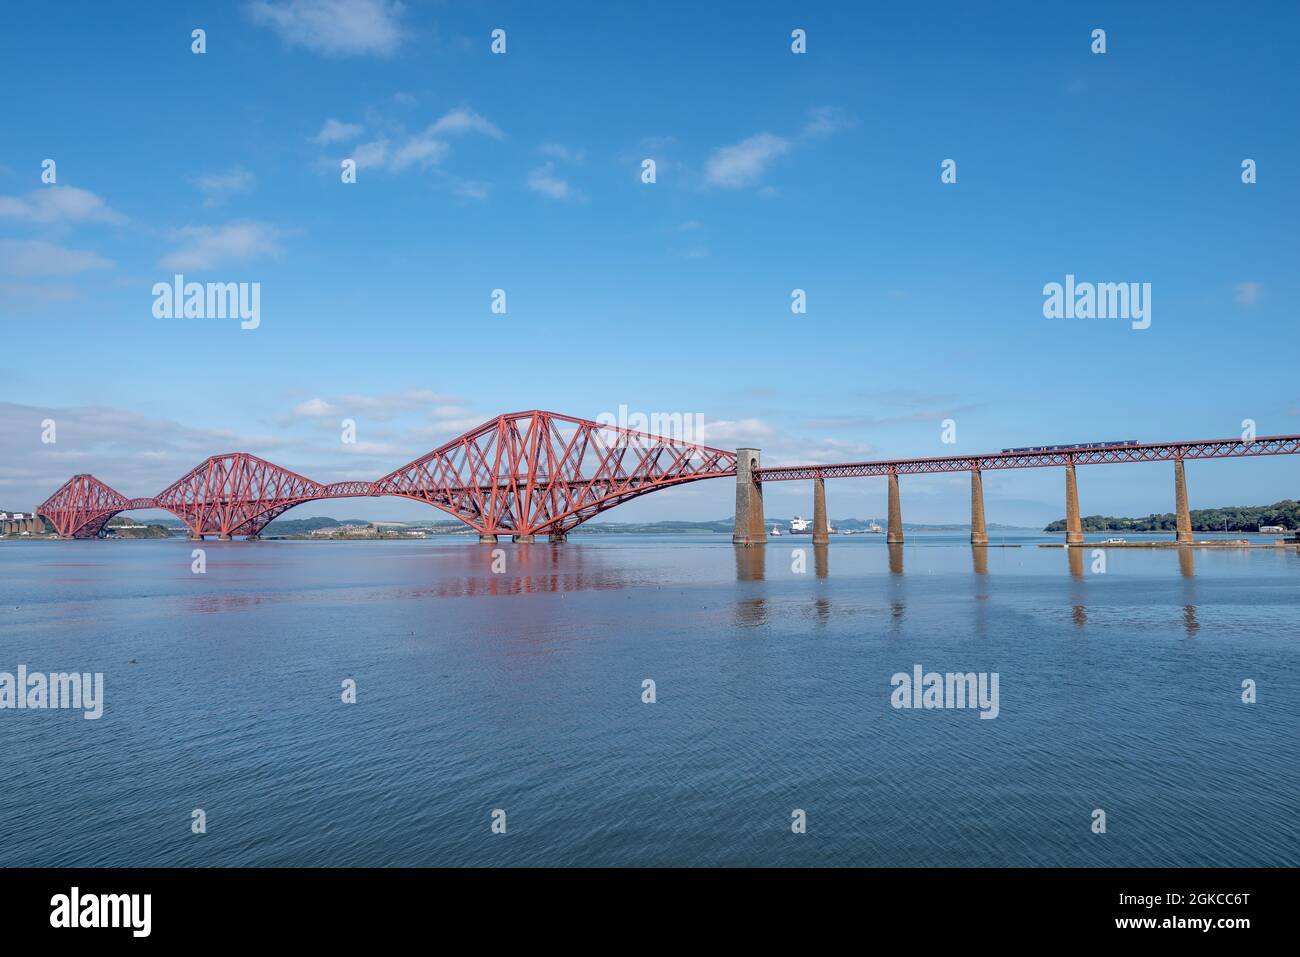 South Queensferry, Edinburgh, Scotland 7th September 2021 - A train passing over the Forth Bridge on a brigh sunny day with blue sky Stock Photo